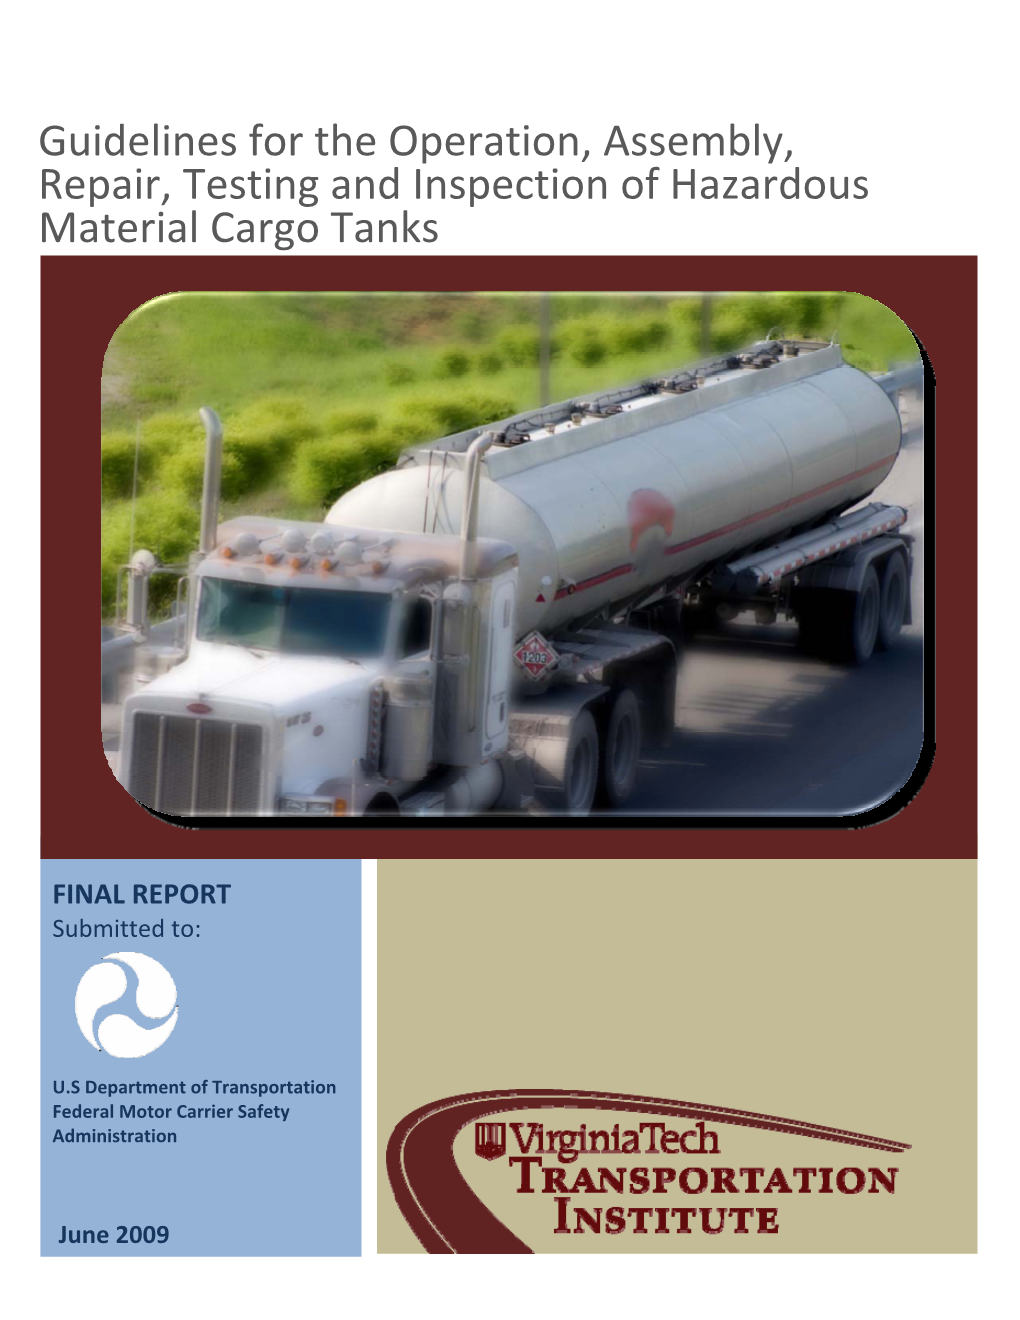 Guidelines for the Operation, Assembly, Repair, Testing and Inspection of Hazardous Material Cargo Tanks